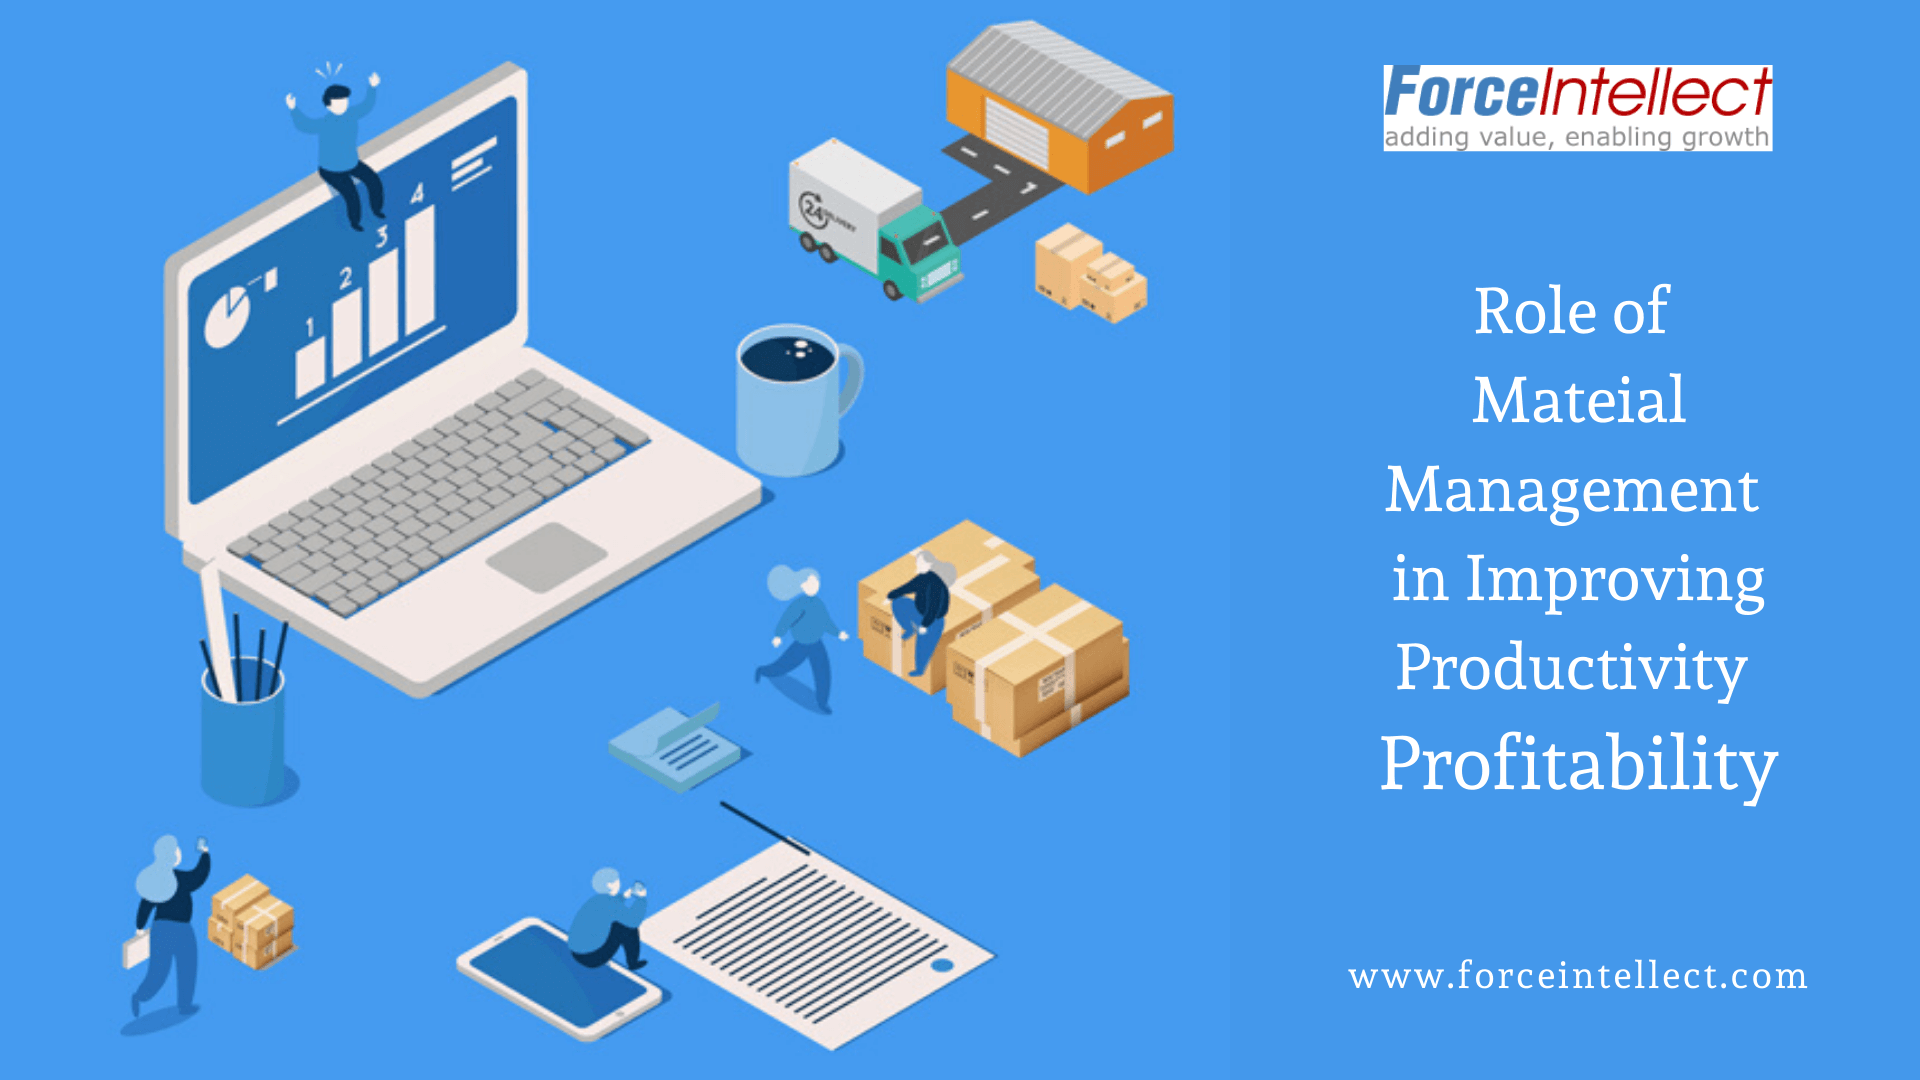 Role of Material Management in Improving Productivity, Profitability